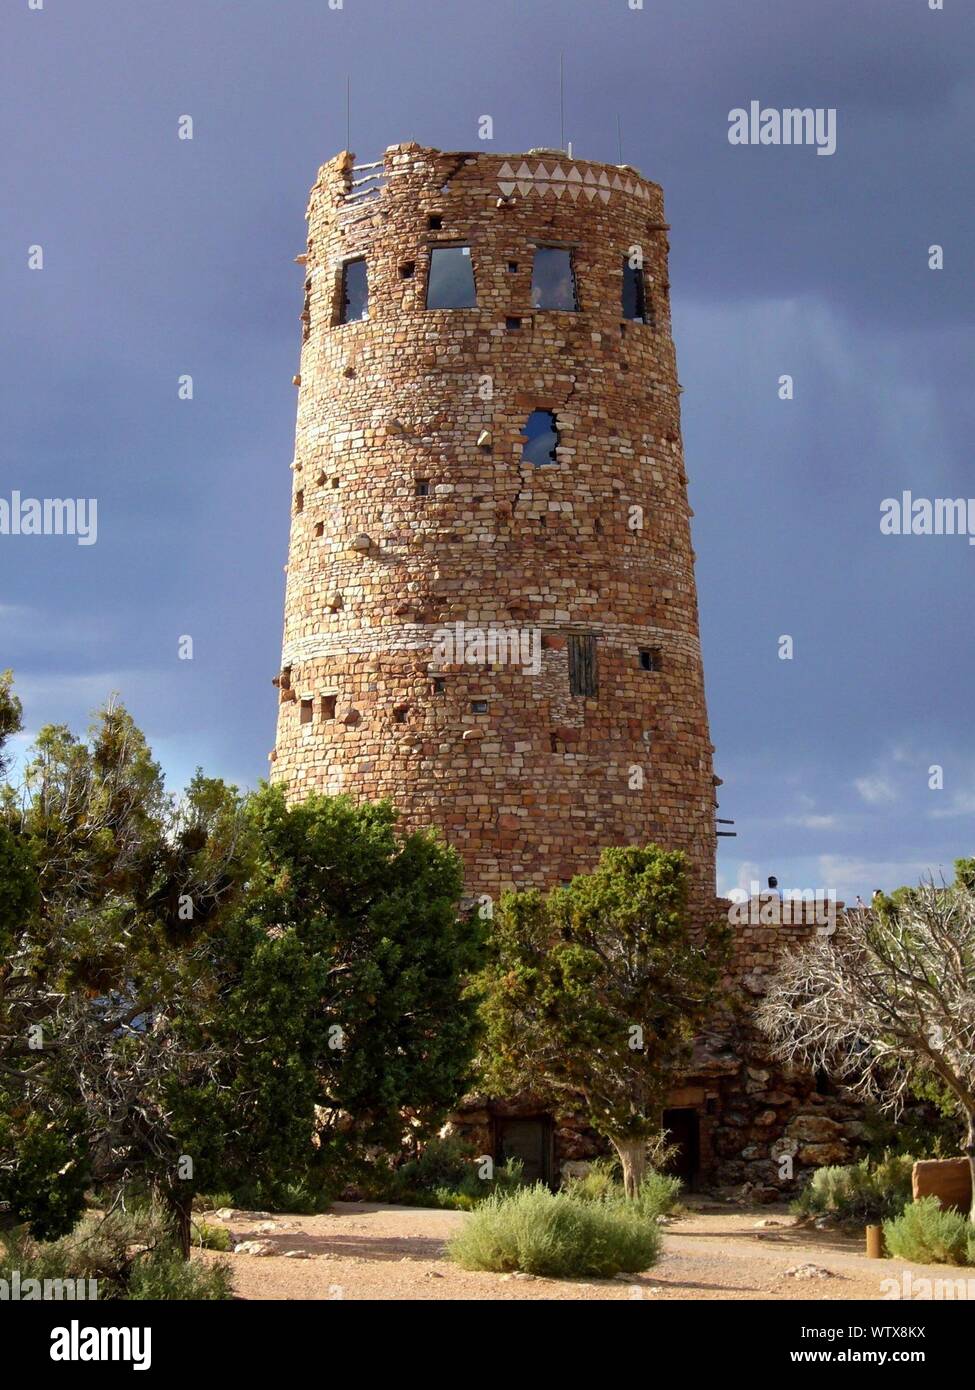 Ancient Watch Tower High Resolution Stock Photography and Images - Alamy